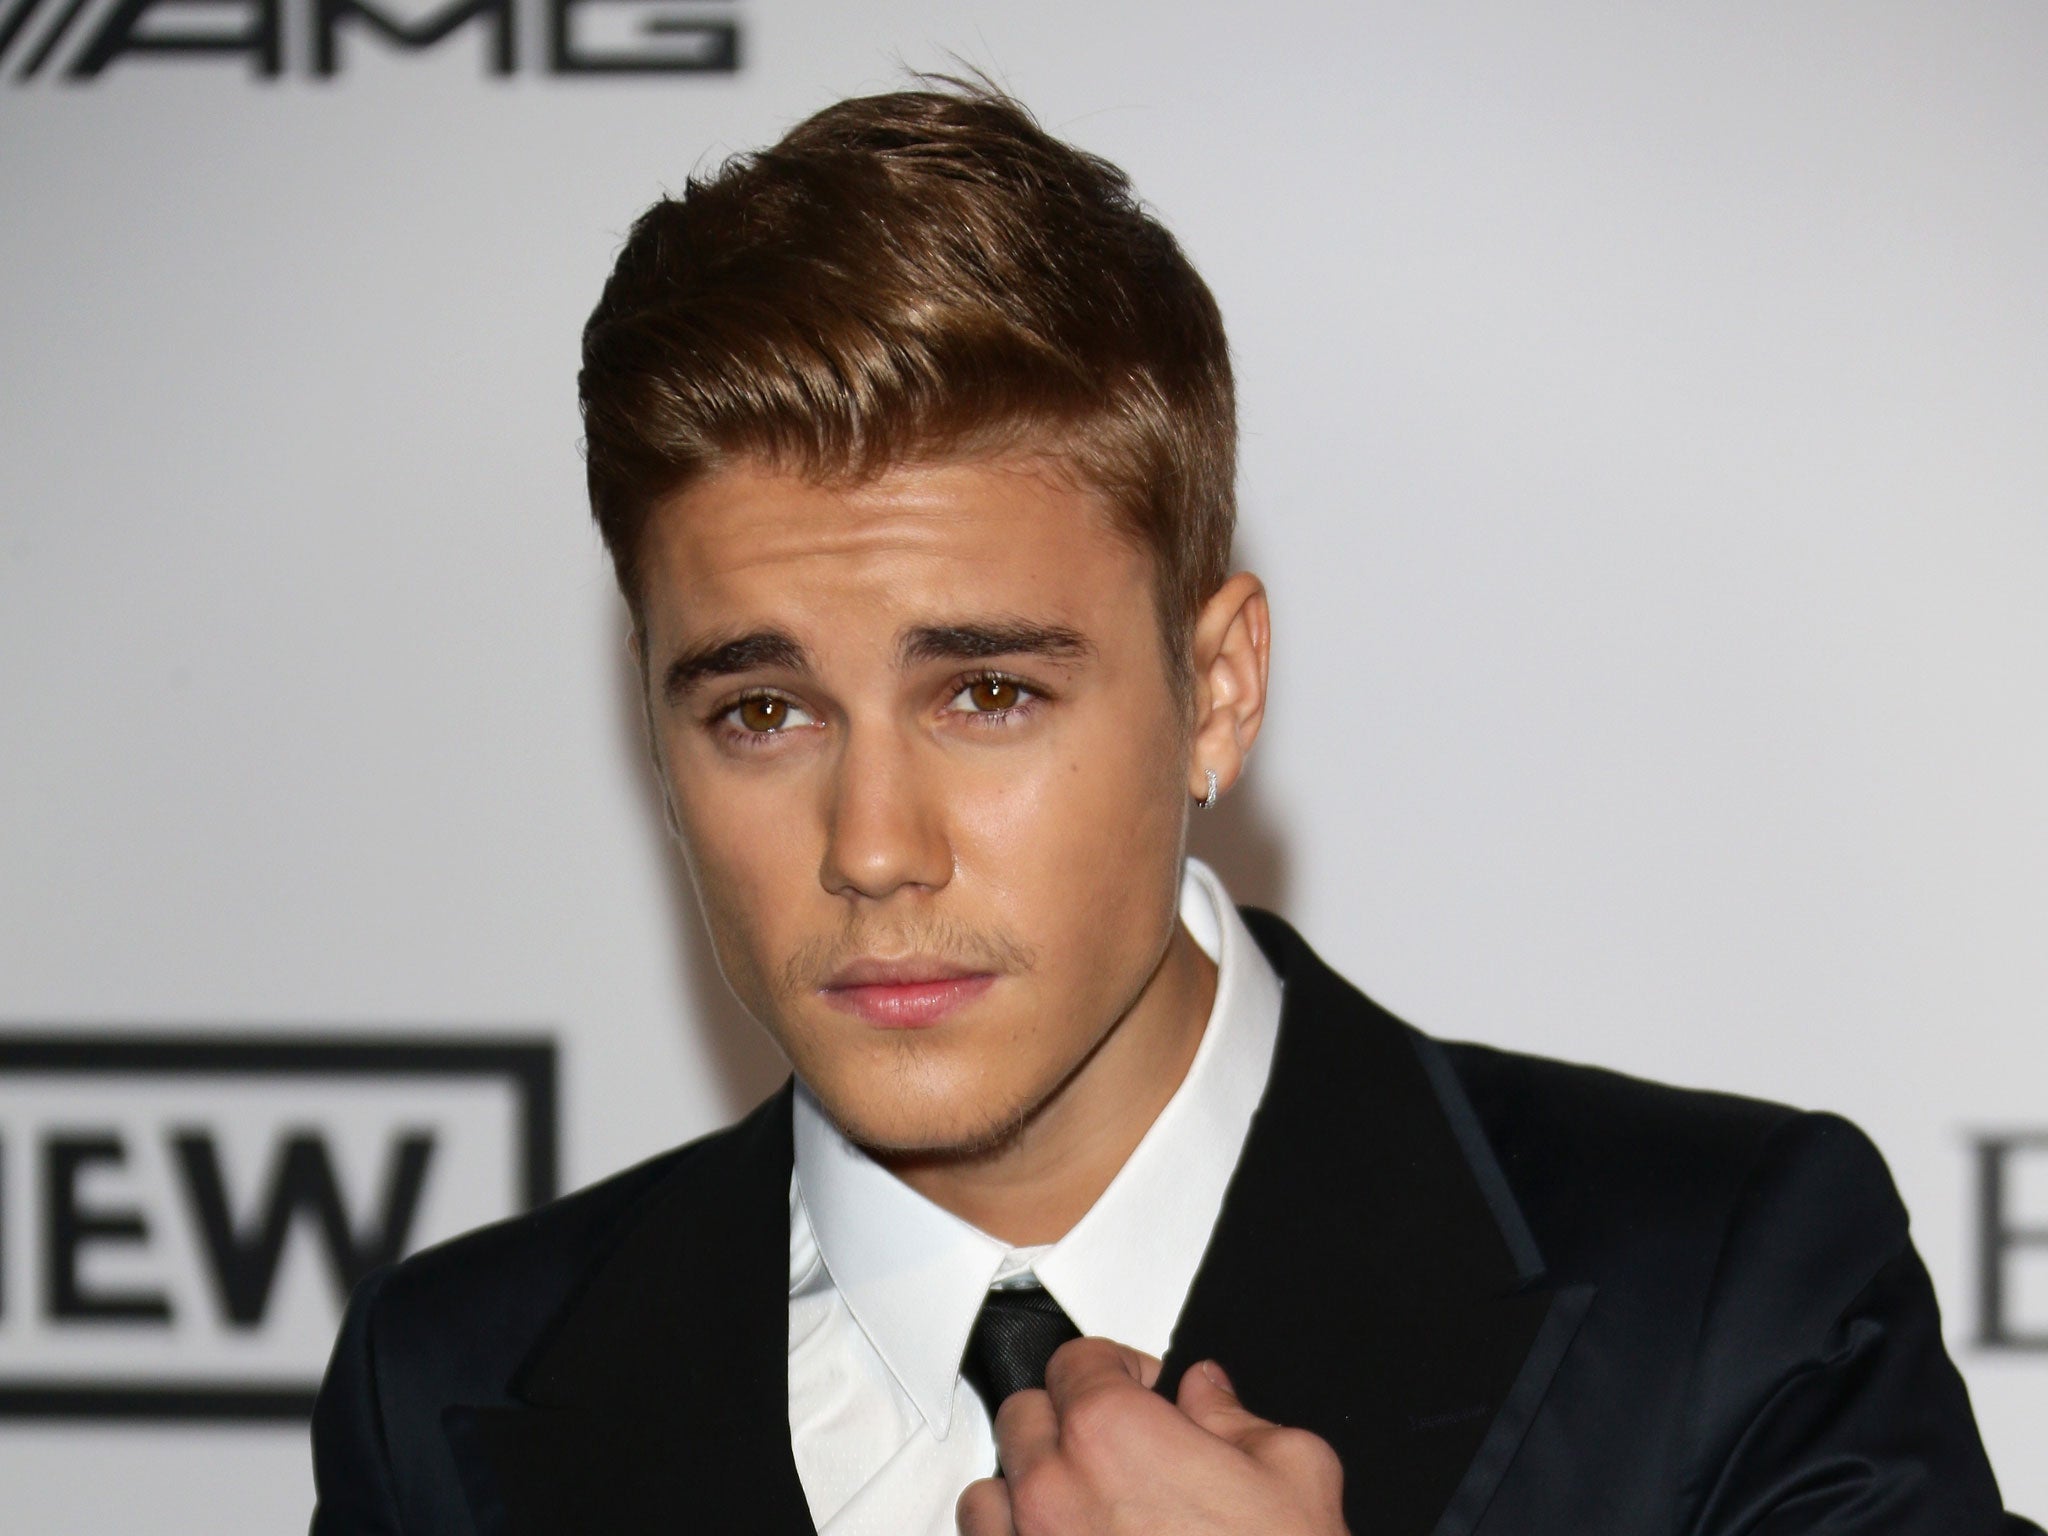 Justin Bieber attends amfAR's 21st Cinema Against AIDS Gala Presented By WORLDVIEW, BOLD FILMS, And BVLGARI at Hotel du Cap-Eden-Roc on 22 May, 2014, in Cap d'Antibes, France